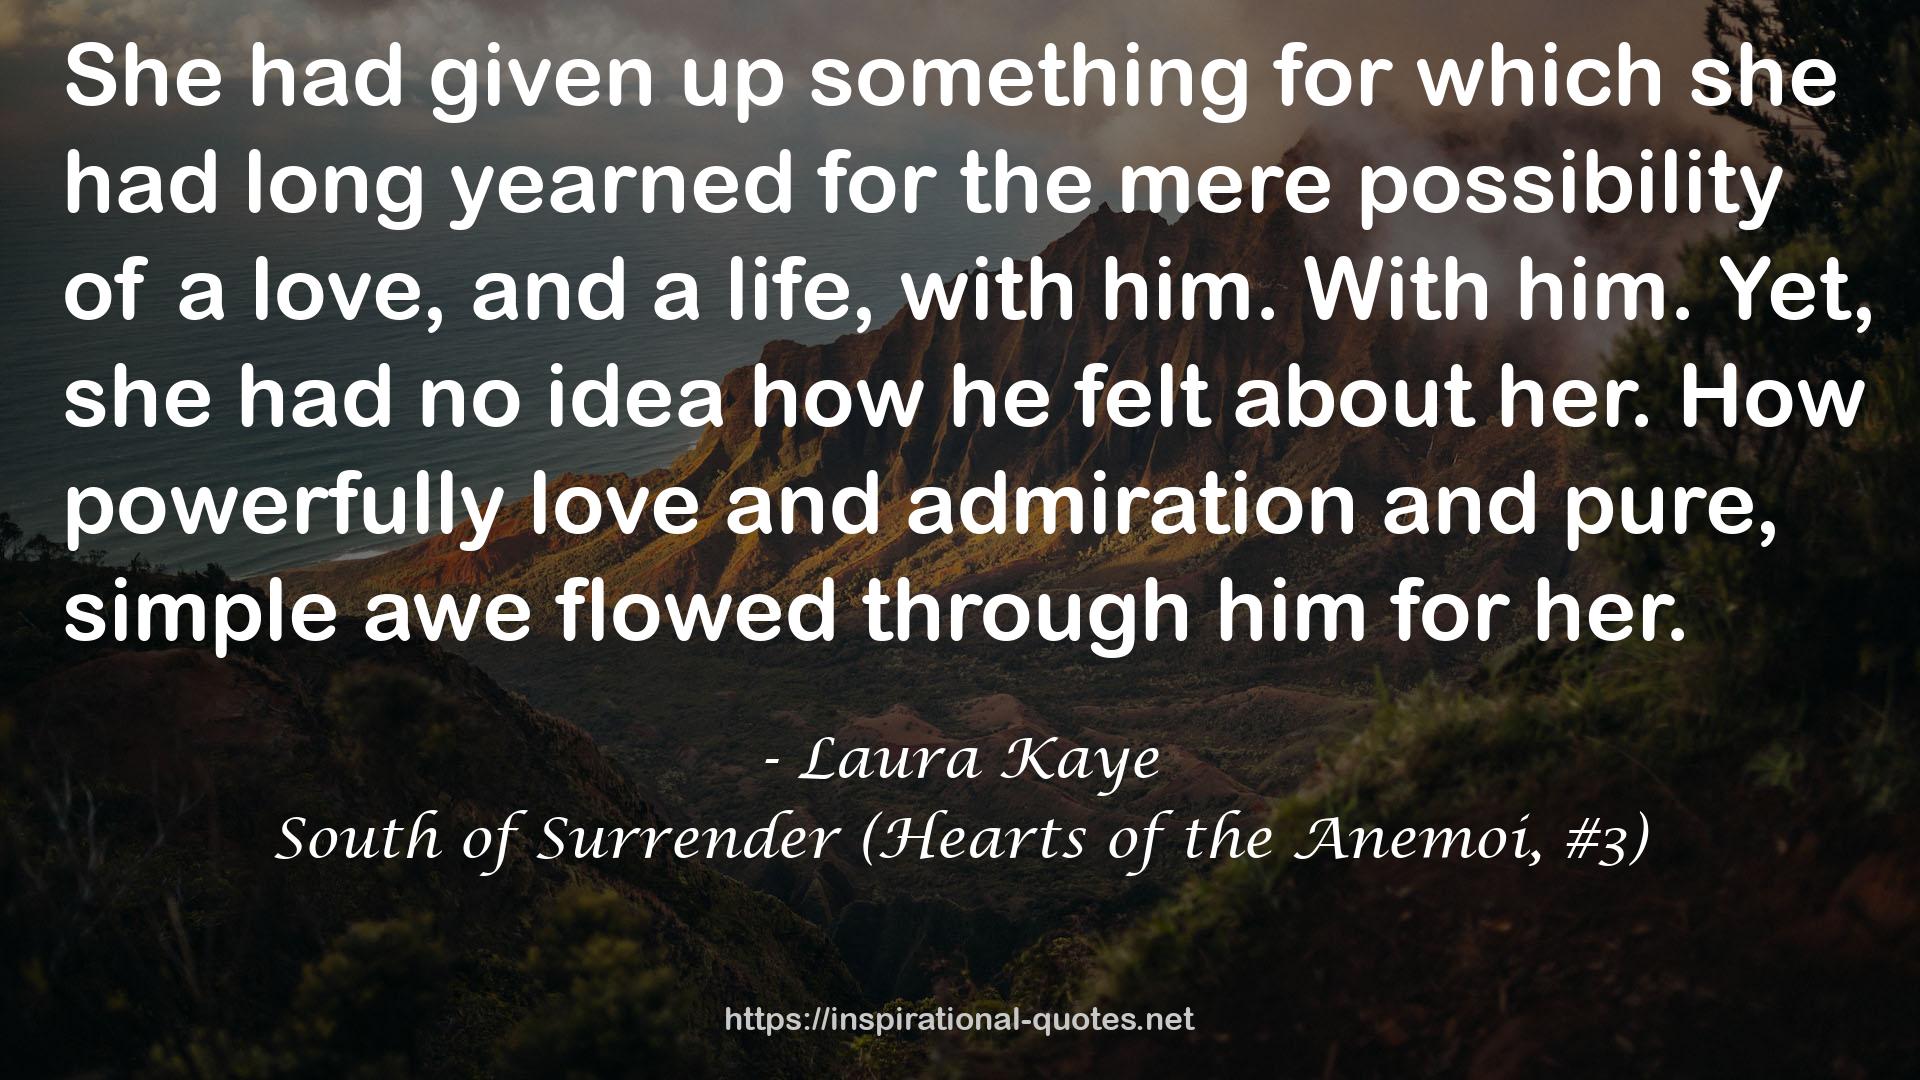 South of Surrender (Hearts of the Anemoi, #3) QUOTES